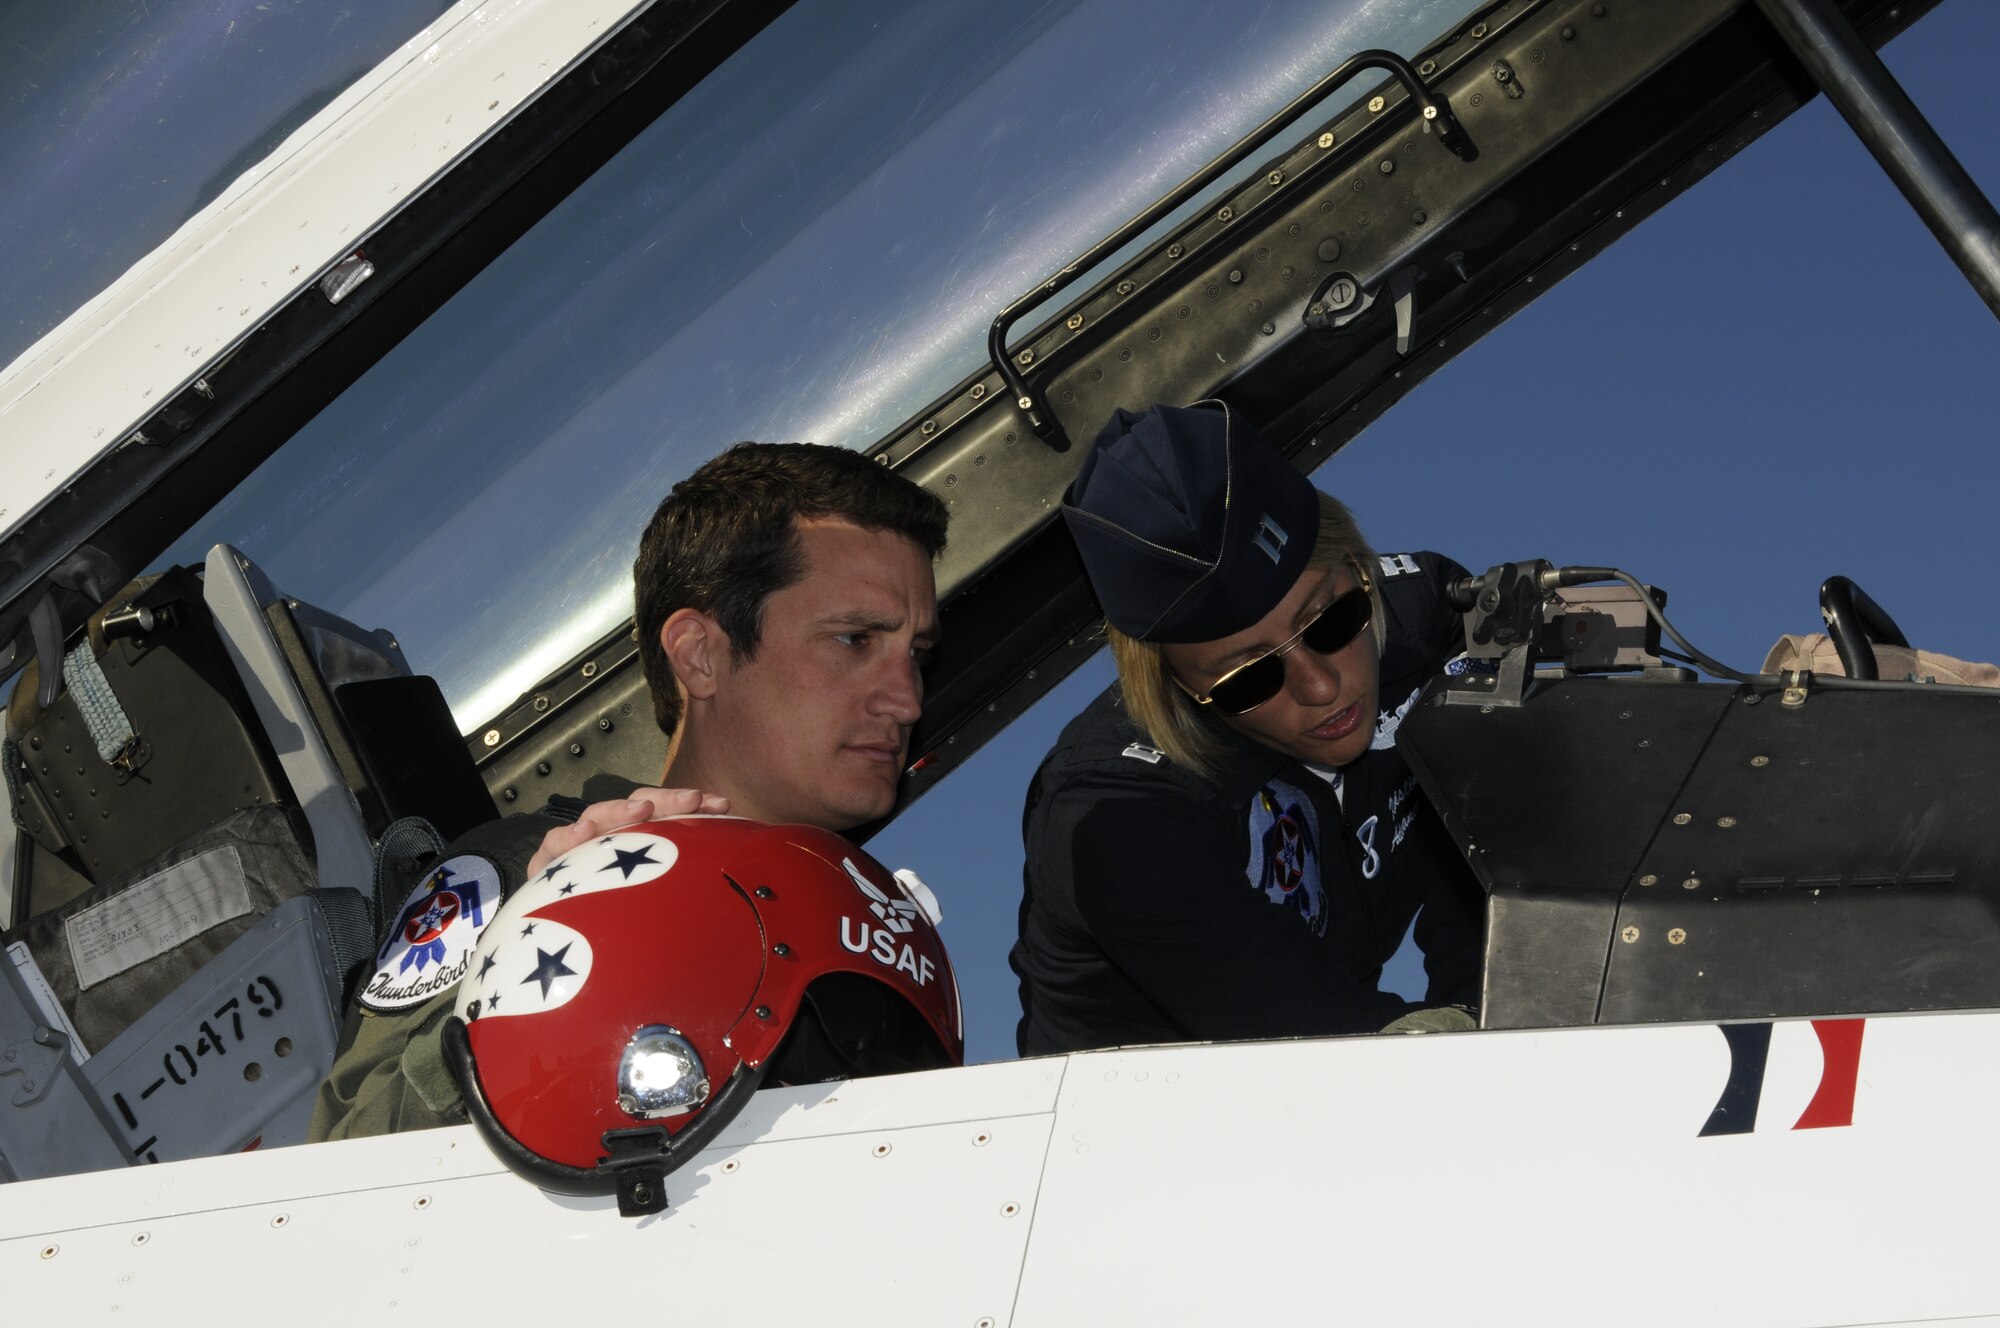 Meteorologist Drew Michaels of local ABC affiliate KHBS/KHOG 40/29 received an orientation ride in a U.S. Air Force Thunderbird F-16D Falcon Sept. 30 during the Fort Smith Air Show, which was attended by a record 255,000 spectators. Capt. Kristin Hubbard, Thunderbird advance pilot and narrator, was Michaels’ pilot. Michaels received a “9G” pin and a framed and autographed lithograph. Michaels pulled 9Gs three times during the flight, which lasted about one hour. (U.S. Air Force photo by Senior Master Sgt. Dennis Brambl/188th Fighter Wing Public Affairs)